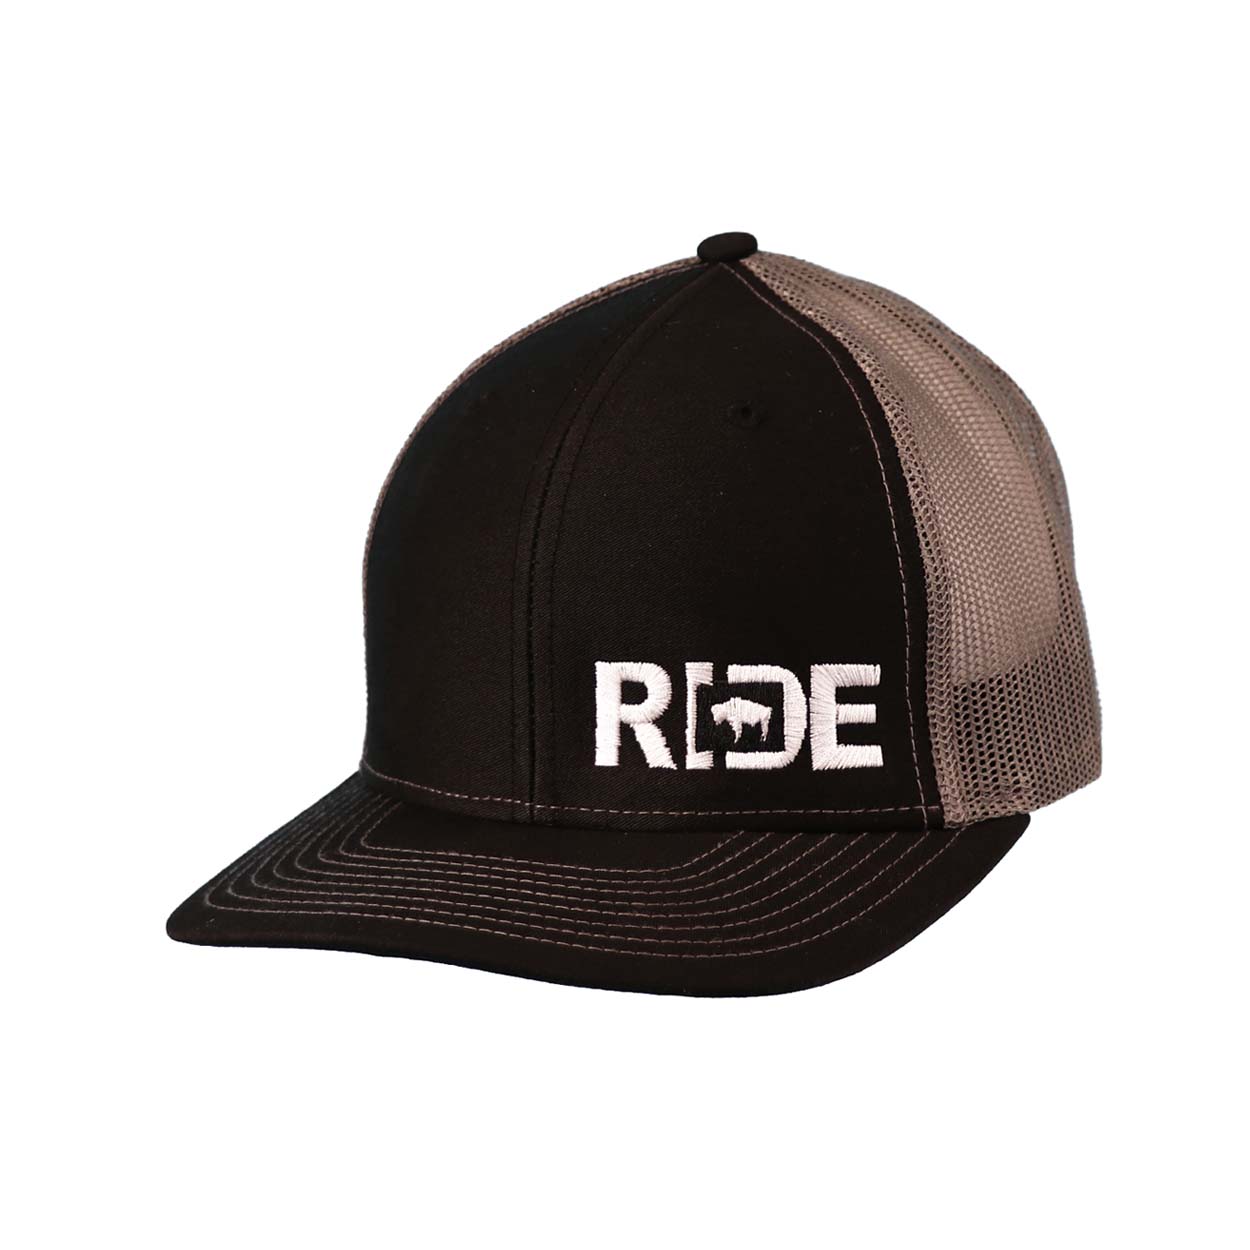 Ride Wyoming Classic Pro Night Out Embroidered Snapback Trucker Hat Black/Gray